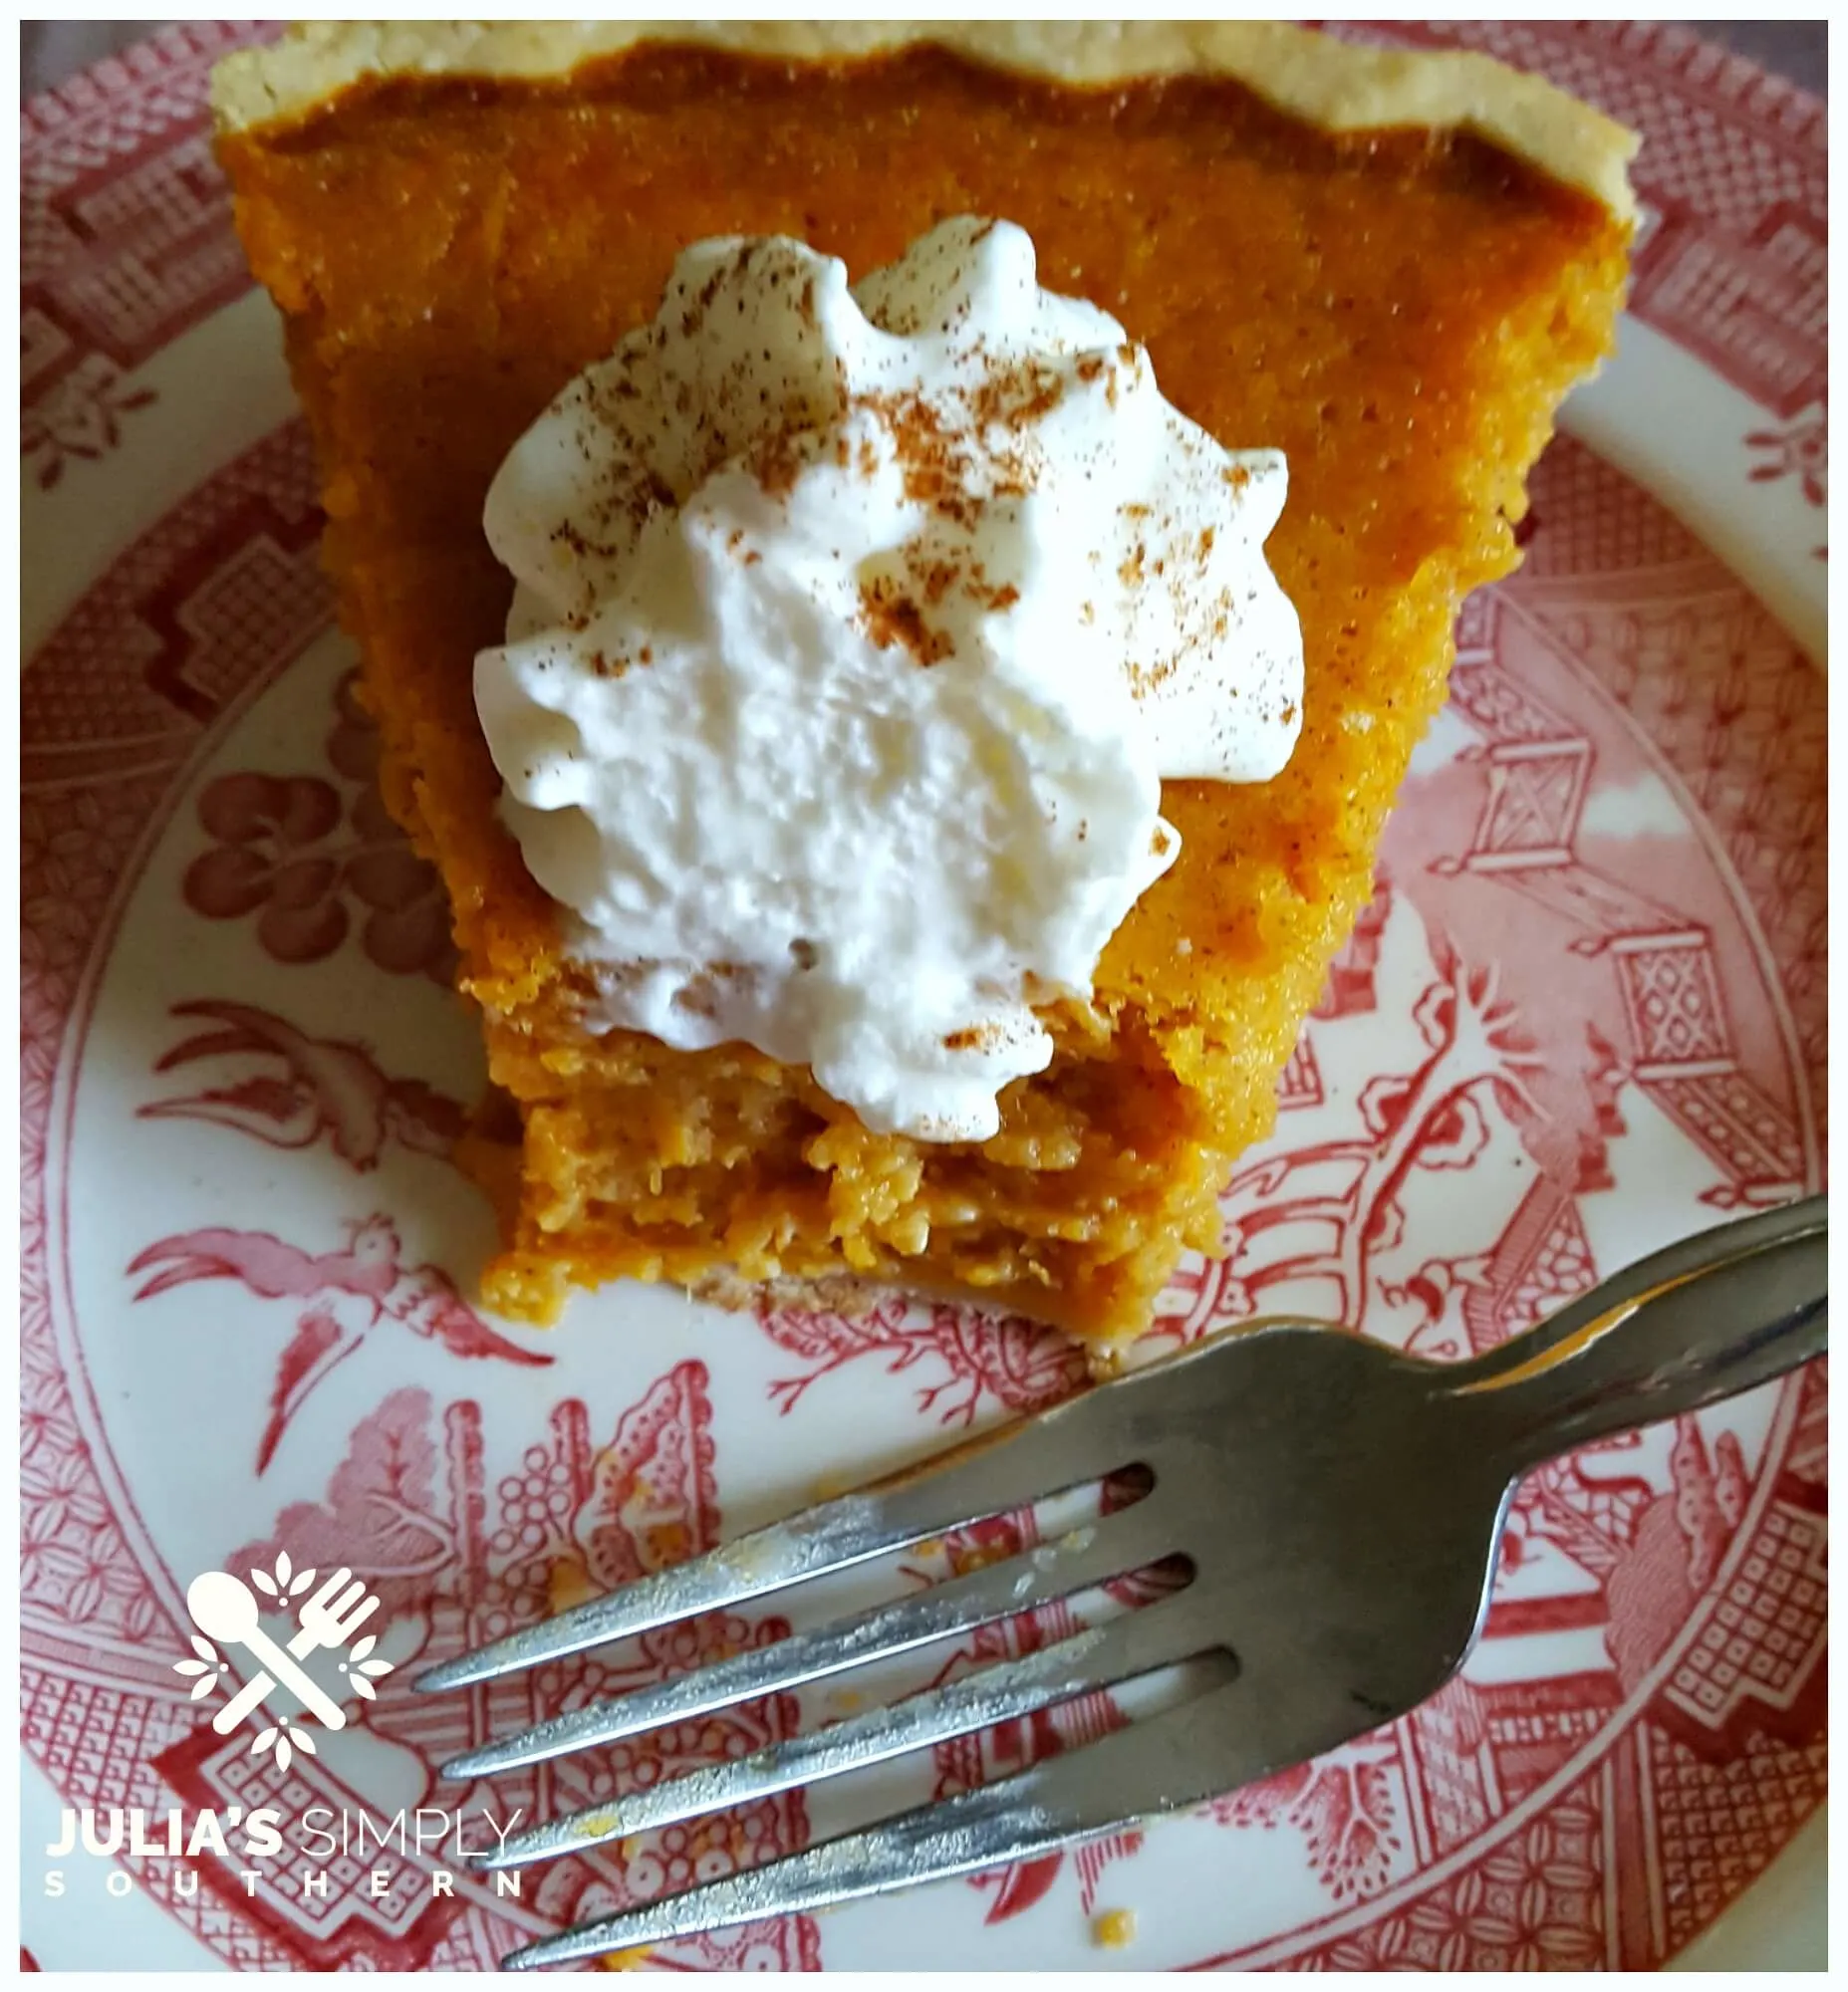 Delicious pie of Southern sweet potato pie topped with whipped cream on a red and white china plate